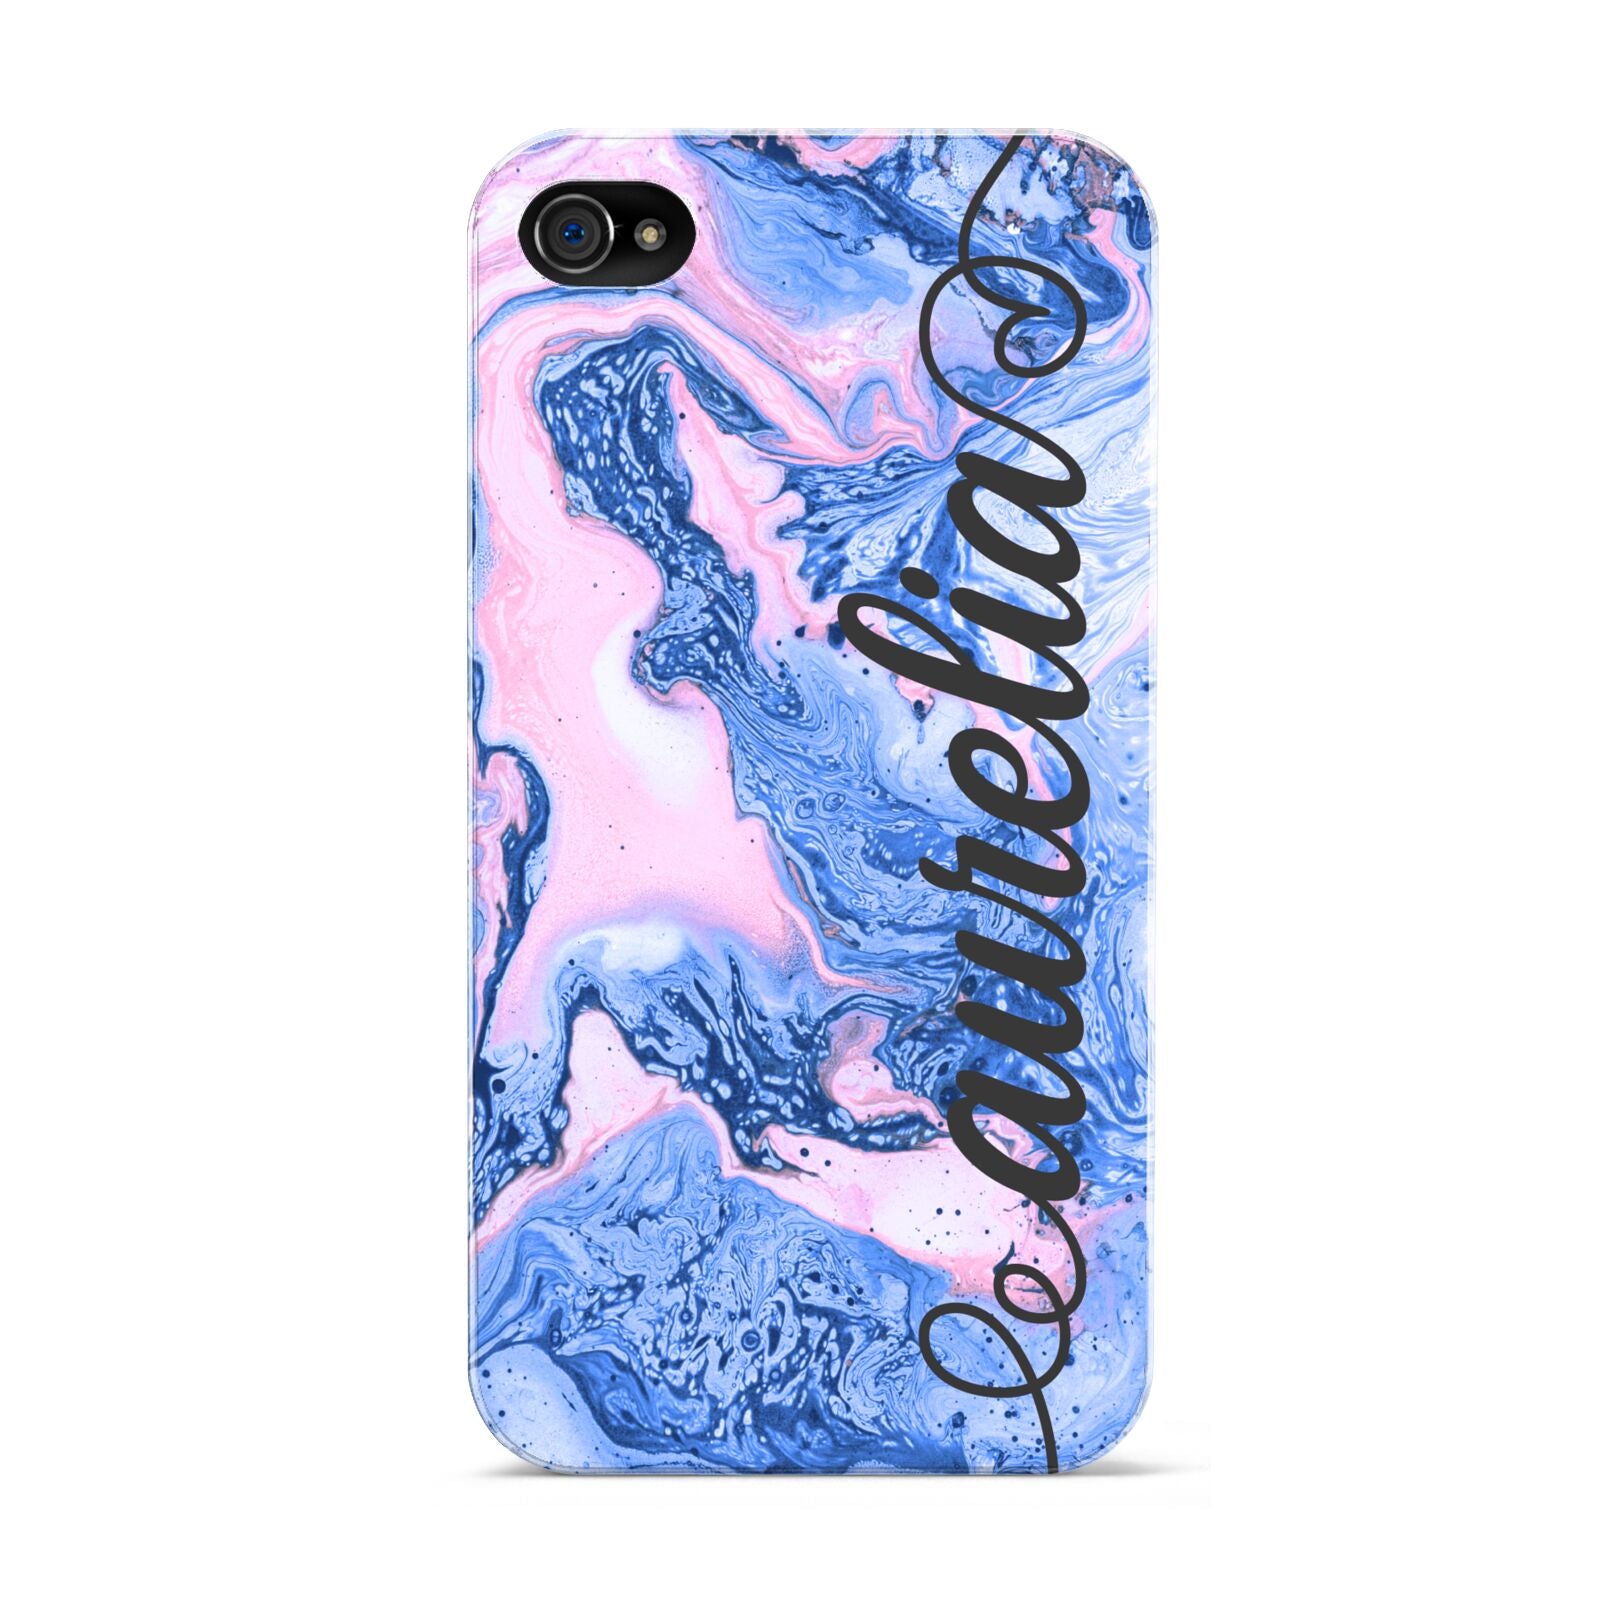 Ocean Blue and Pink Marble Apple iPhone 4s Case